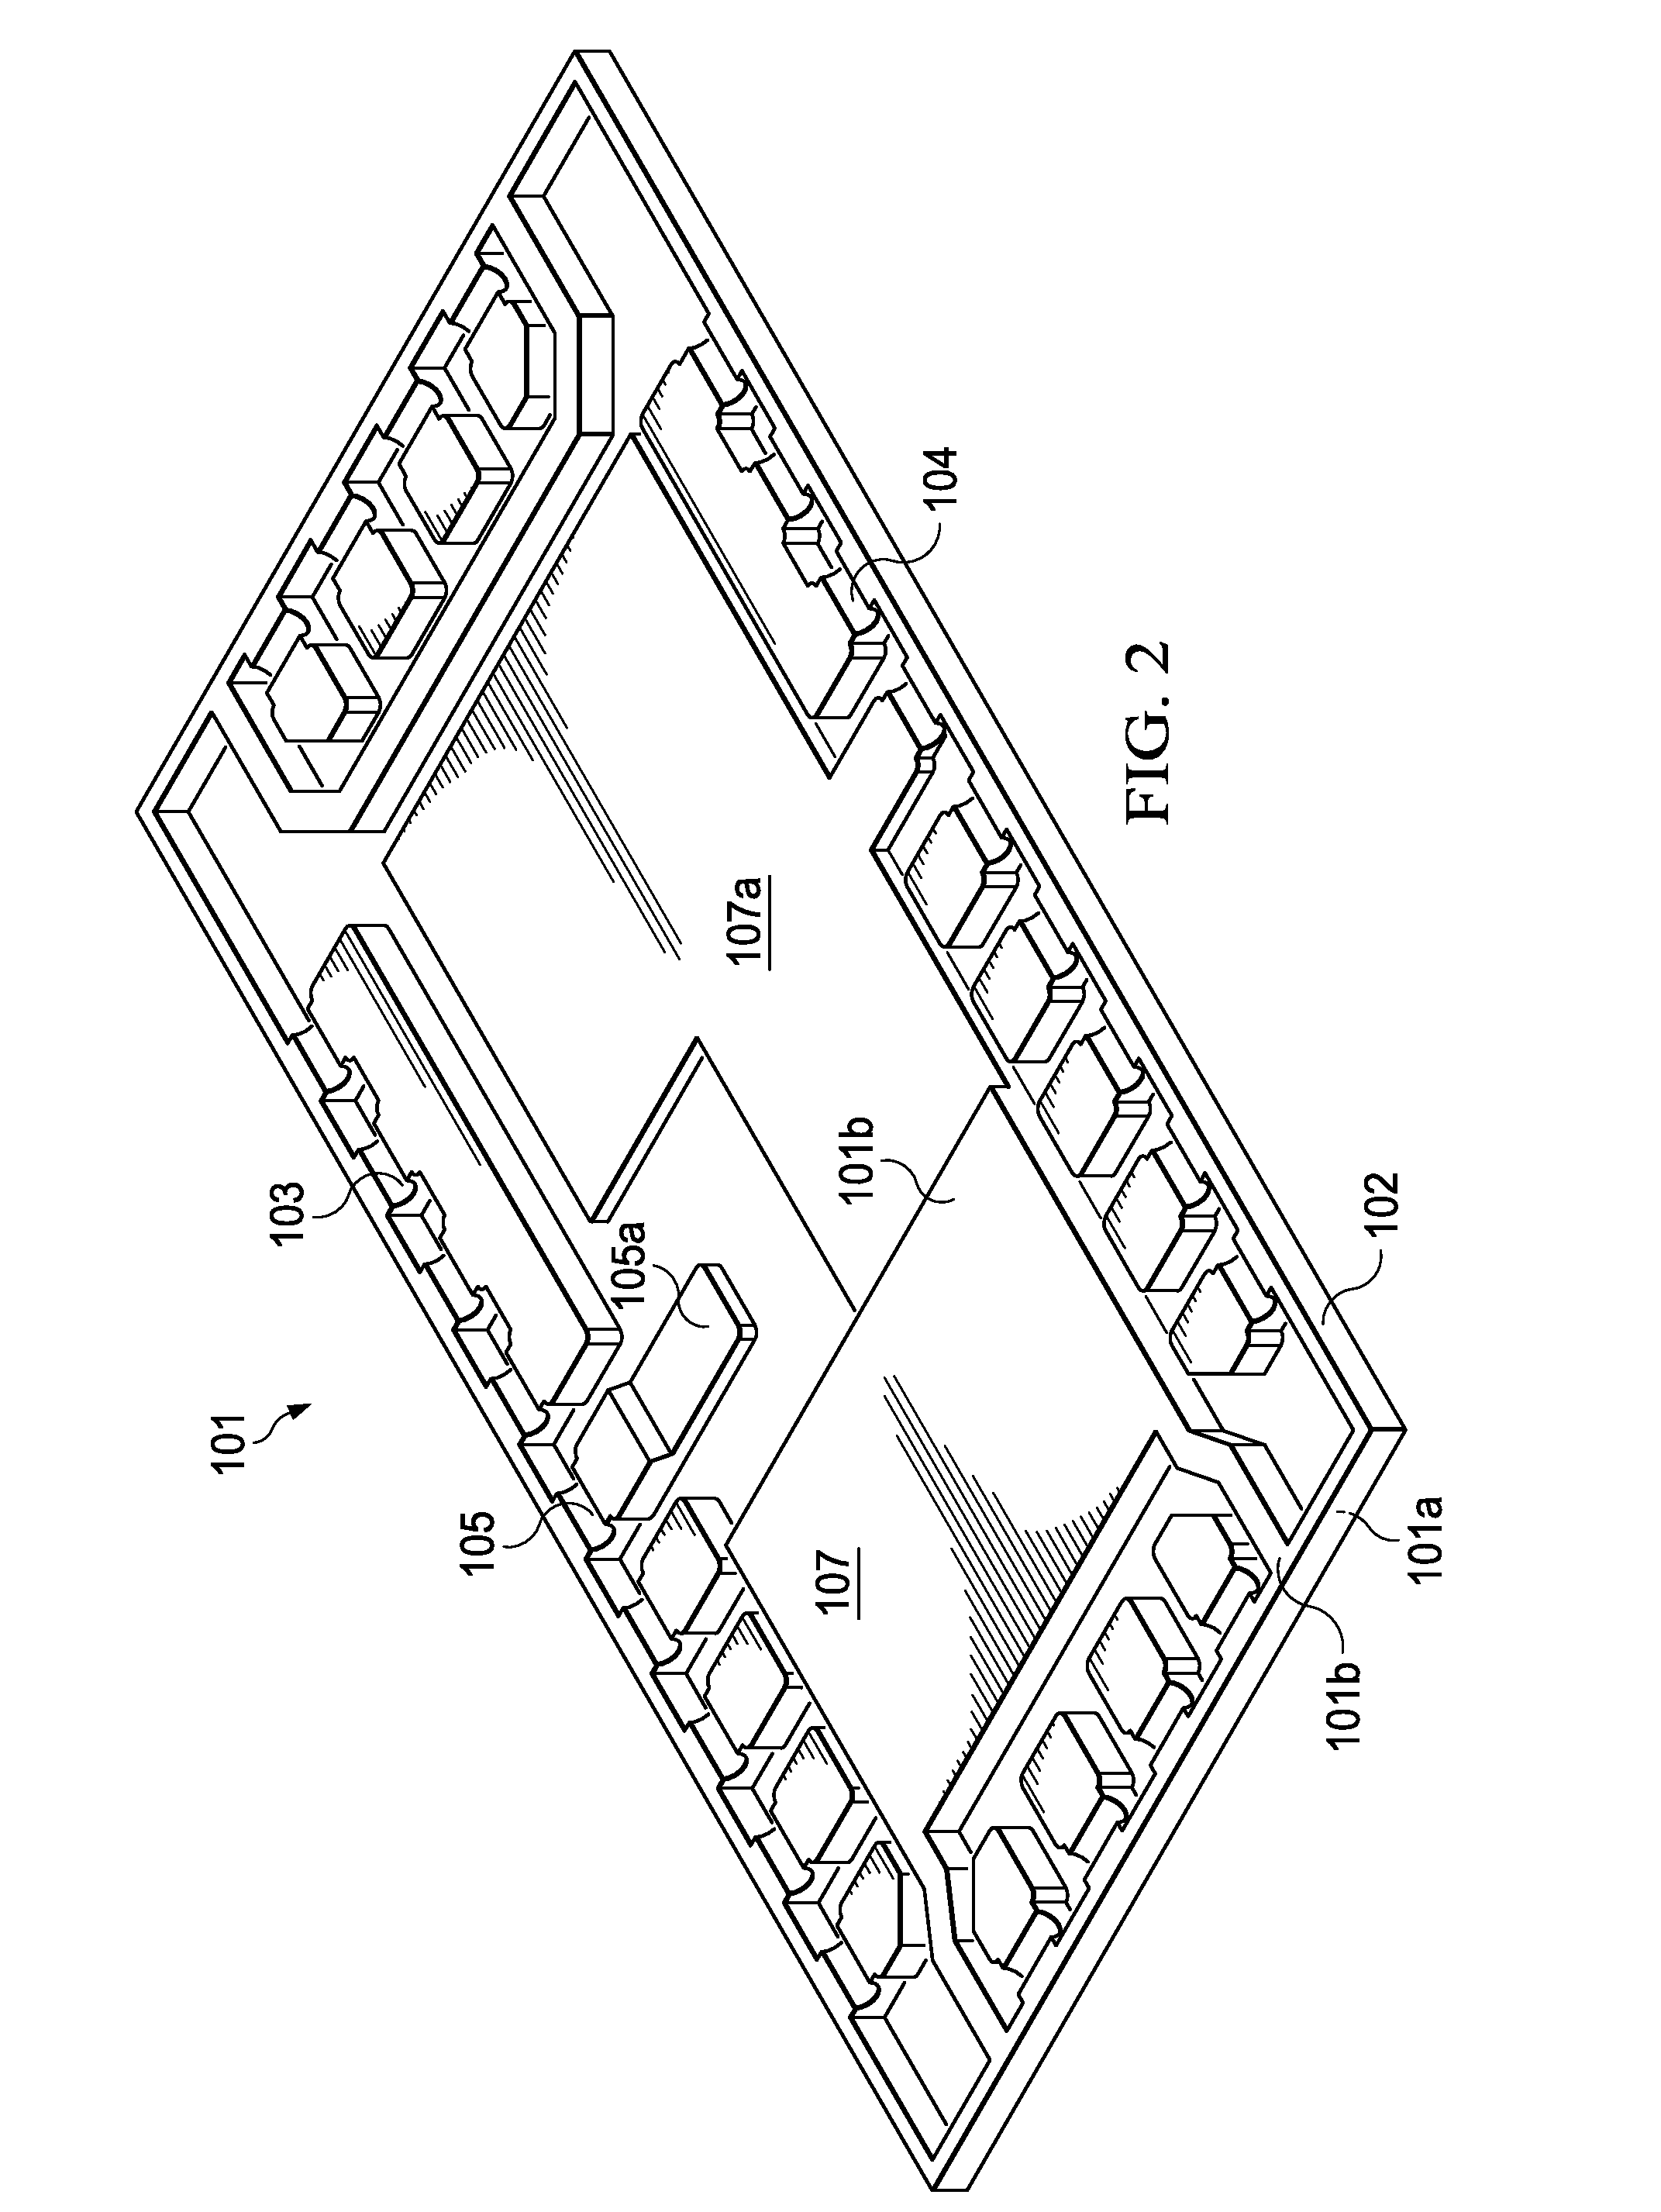 Converter having partially thinned leadframe with stacked chips and interposer, free of wires and clips